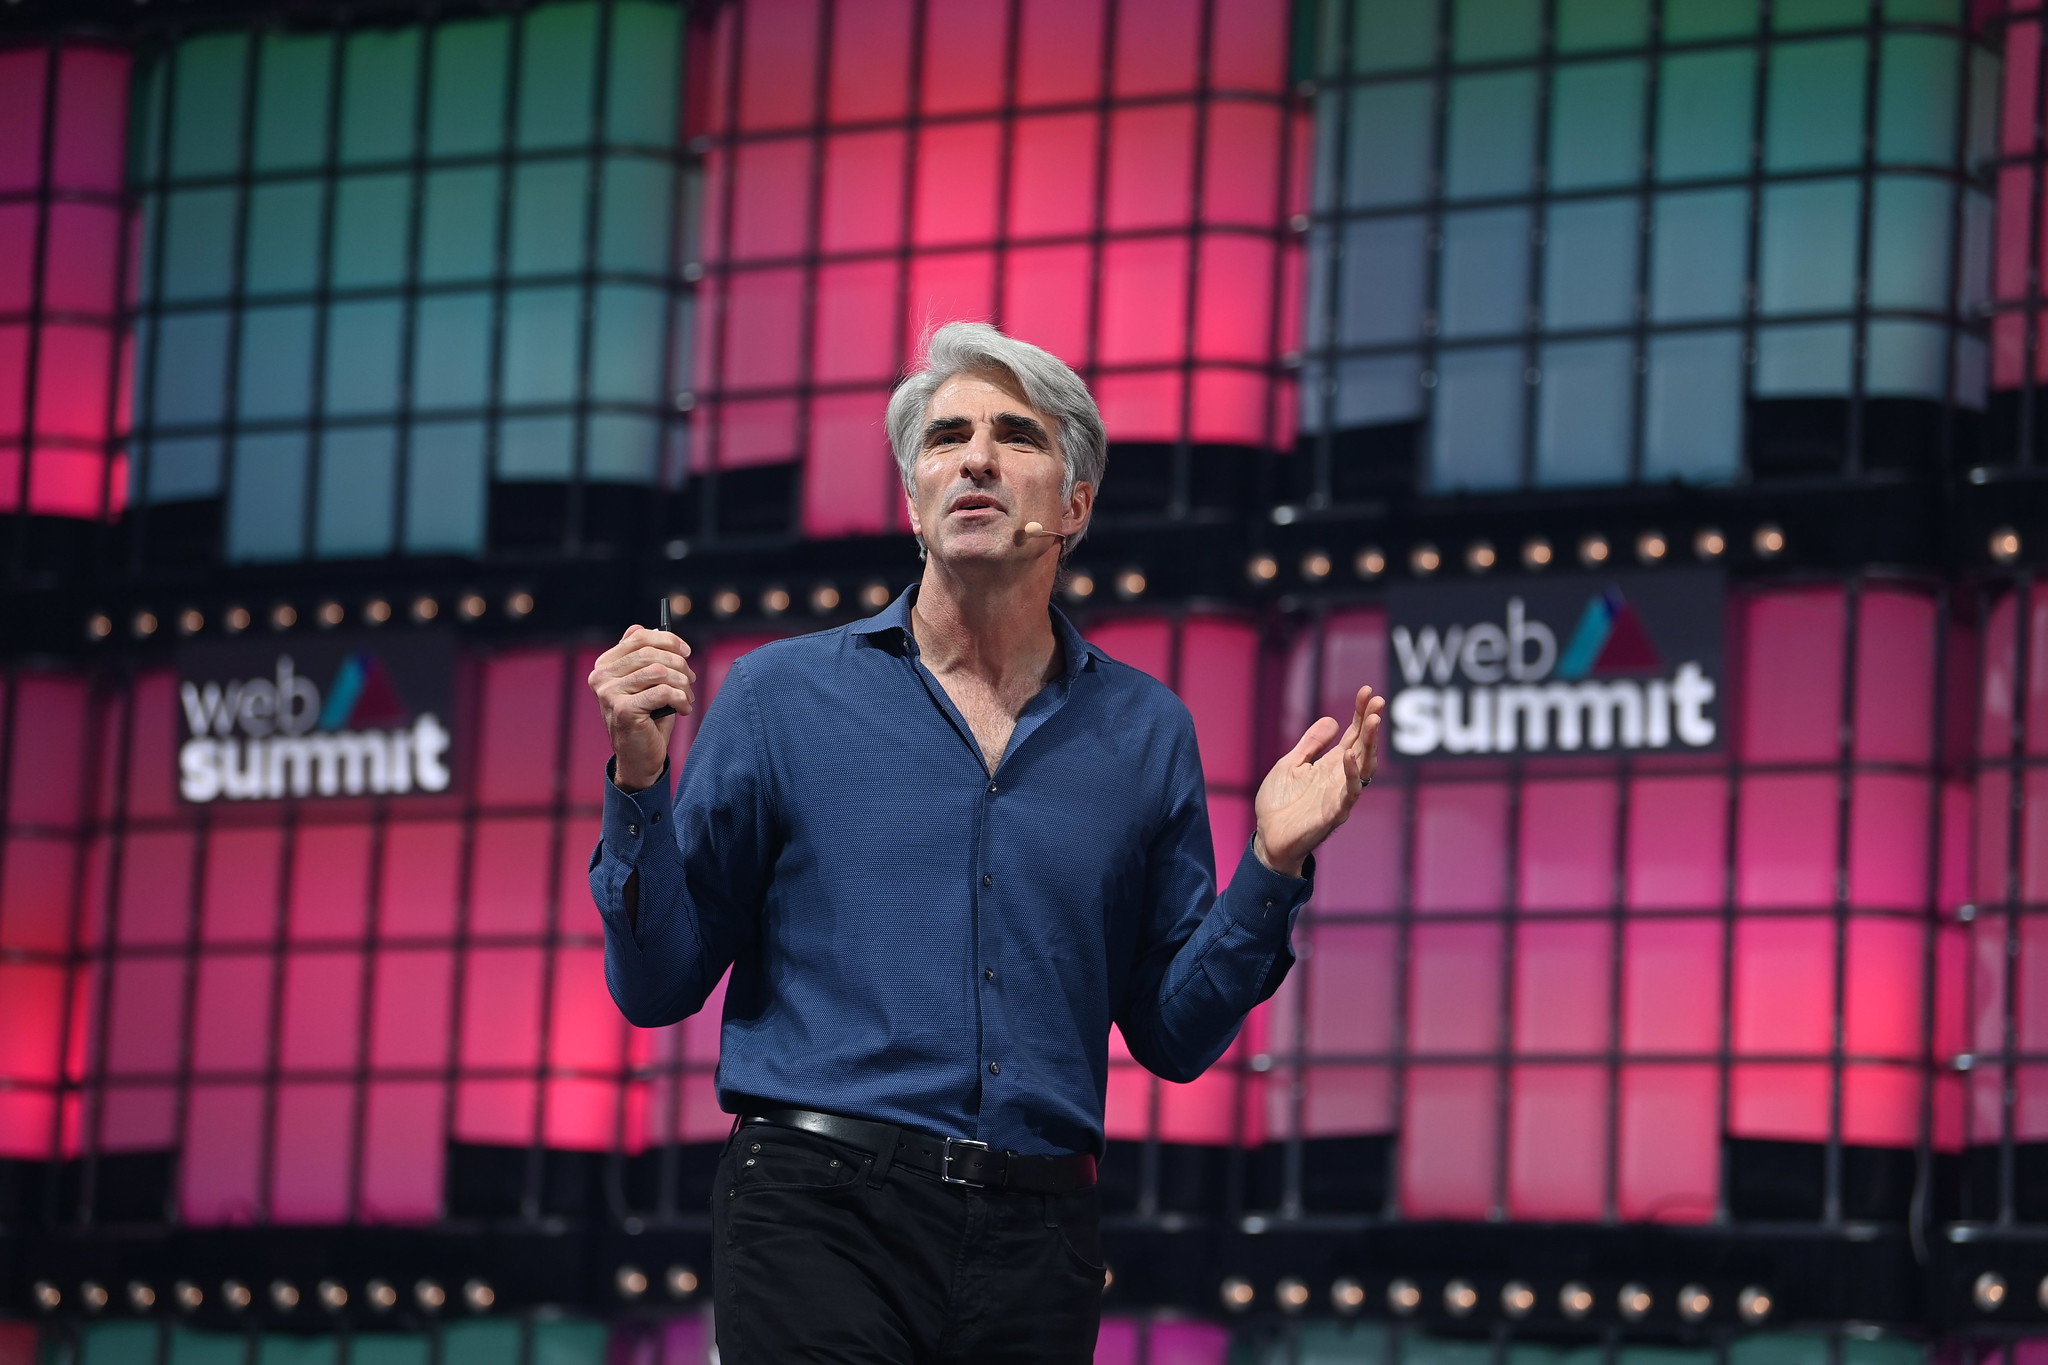 Photograph of a person (Craig Federighi, senior VP of software engineering at Apple) speaking on stage at Web Summit. They are gesturing with their hands and wearing an on-ear microphone.